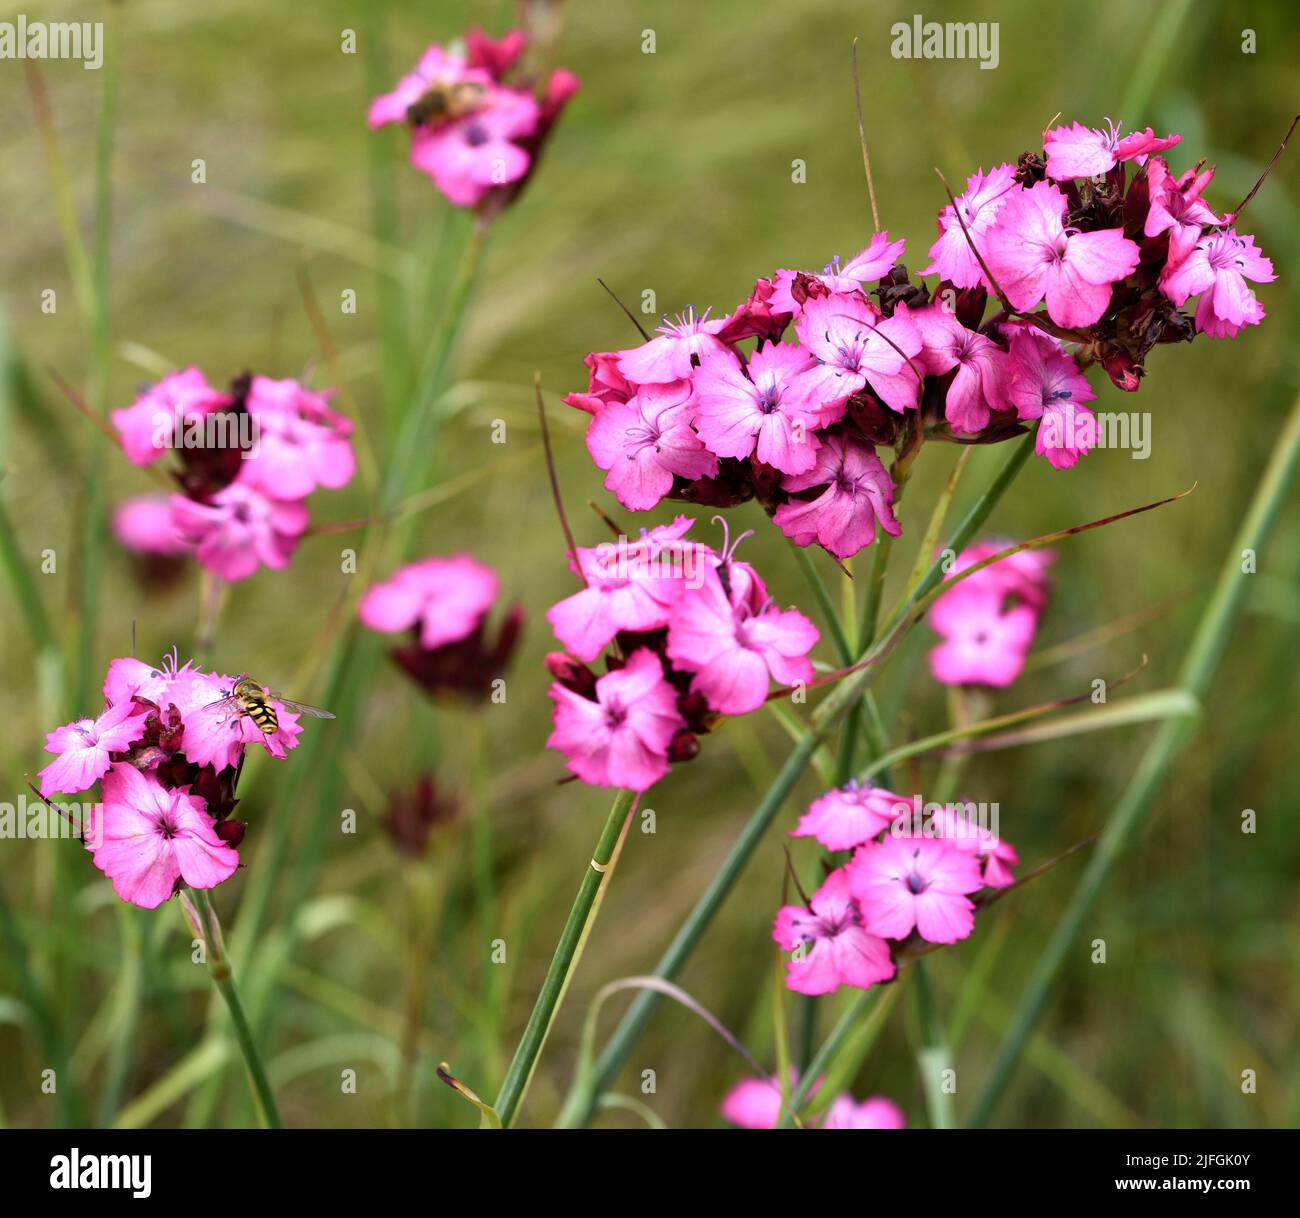 Closeup of the pink flowers of Dianthus carthusianorum. Stock Photo